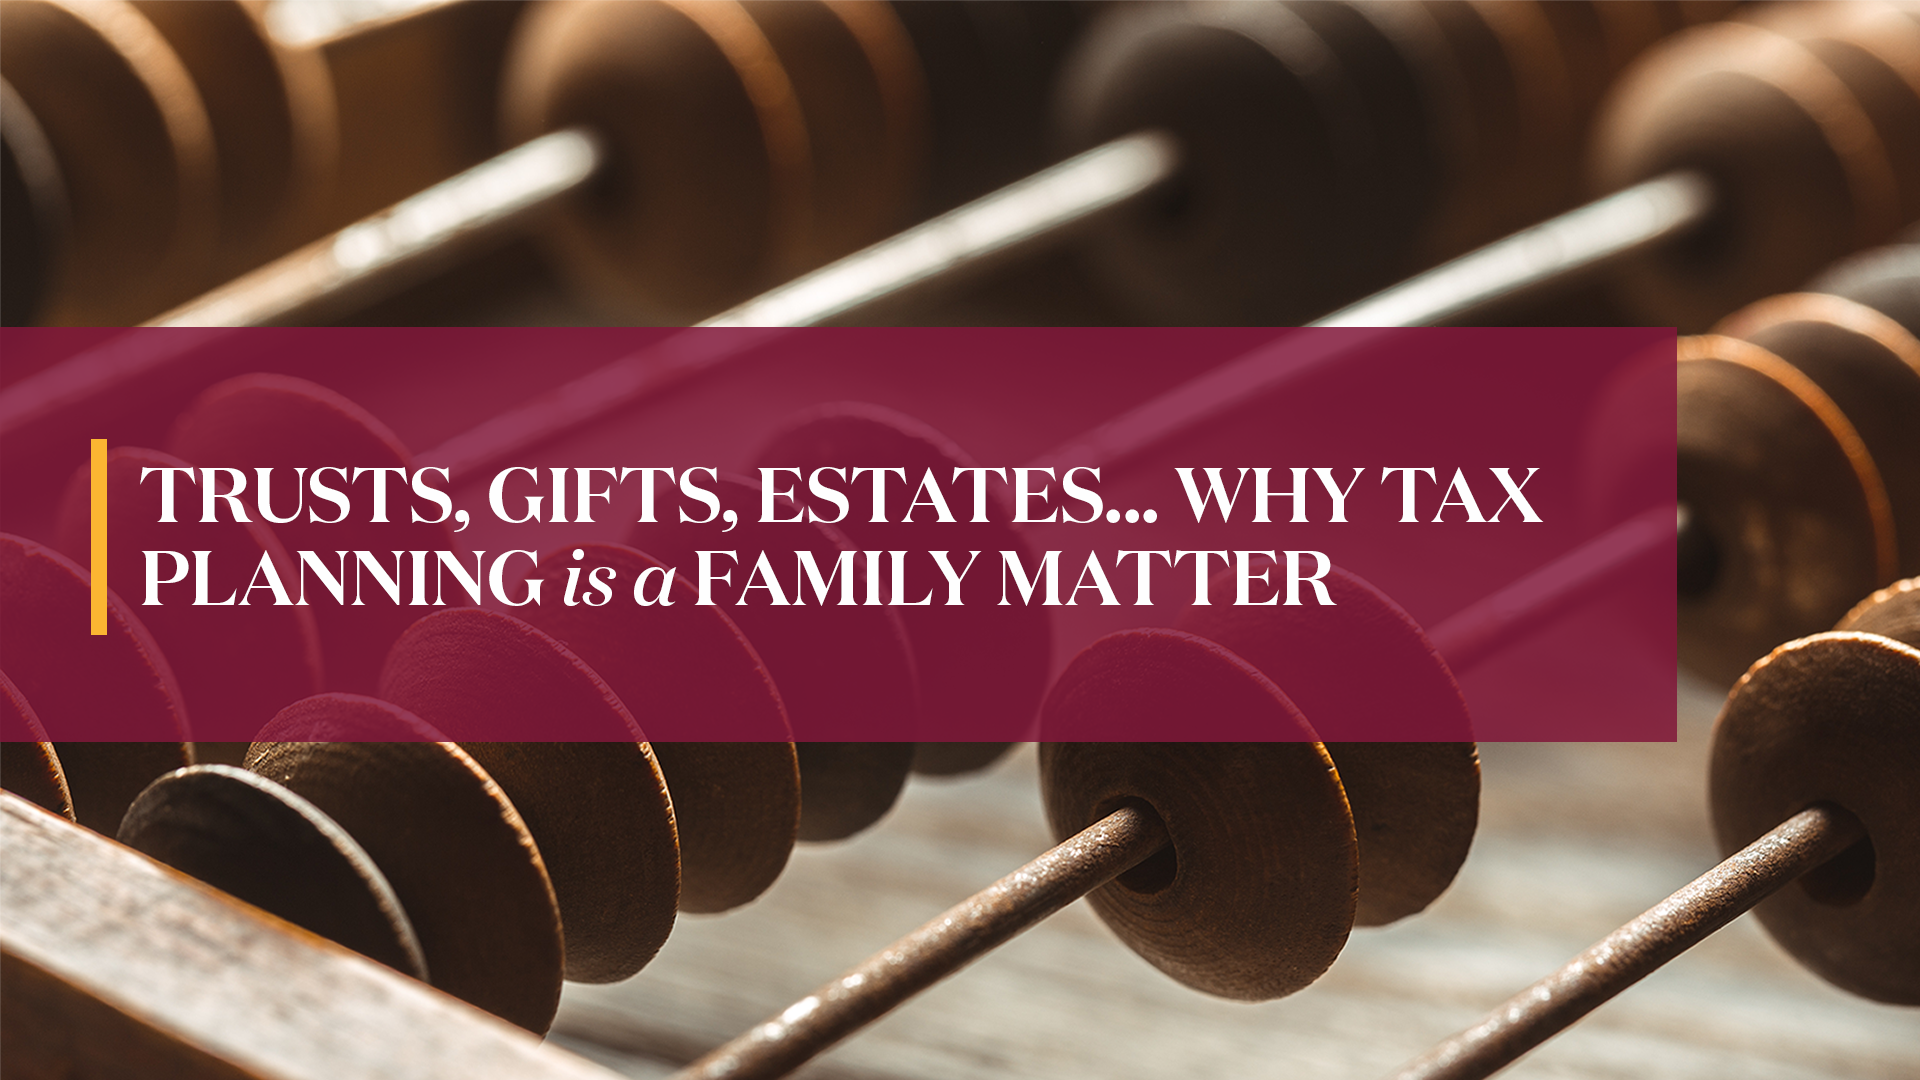 Trusts, Gifts, Estates… Why Tax Planning is a Family Matter